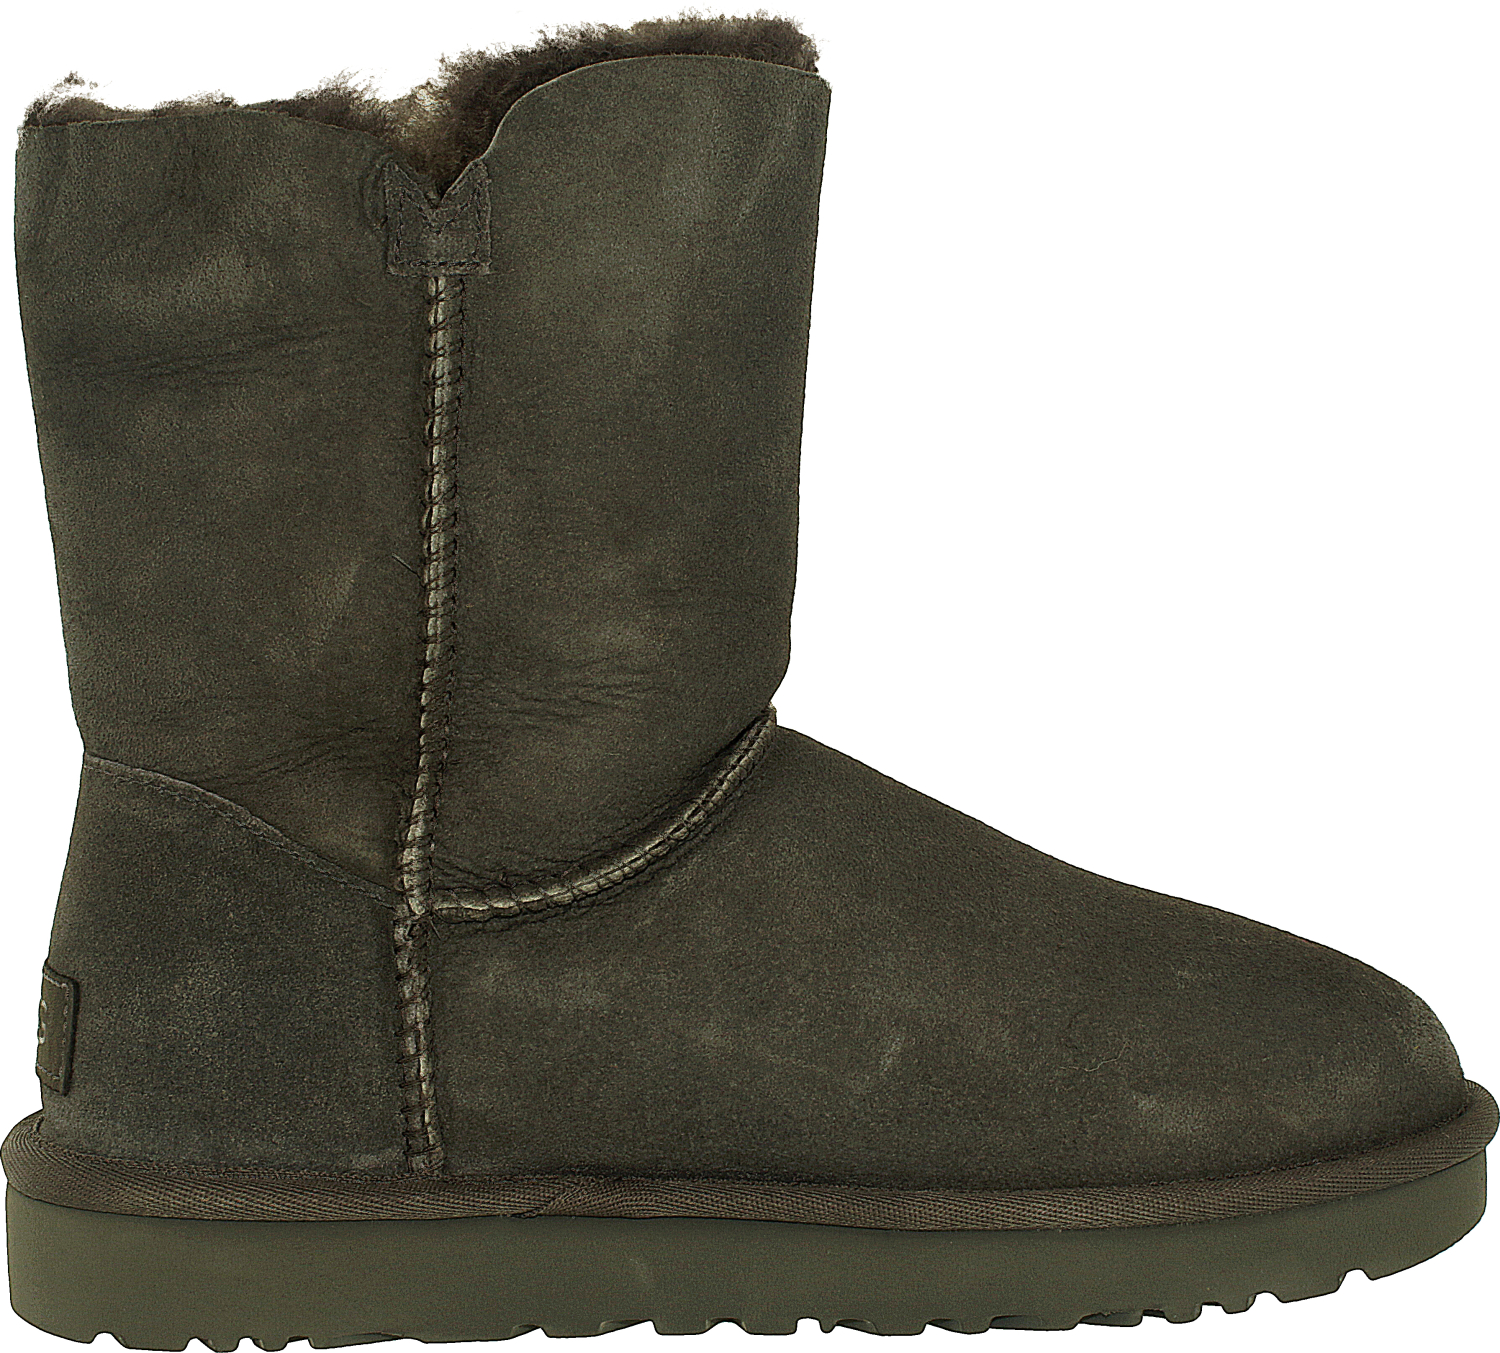 Ugg Women's Bailey Button II Ankle-High Suede Boot | eBay